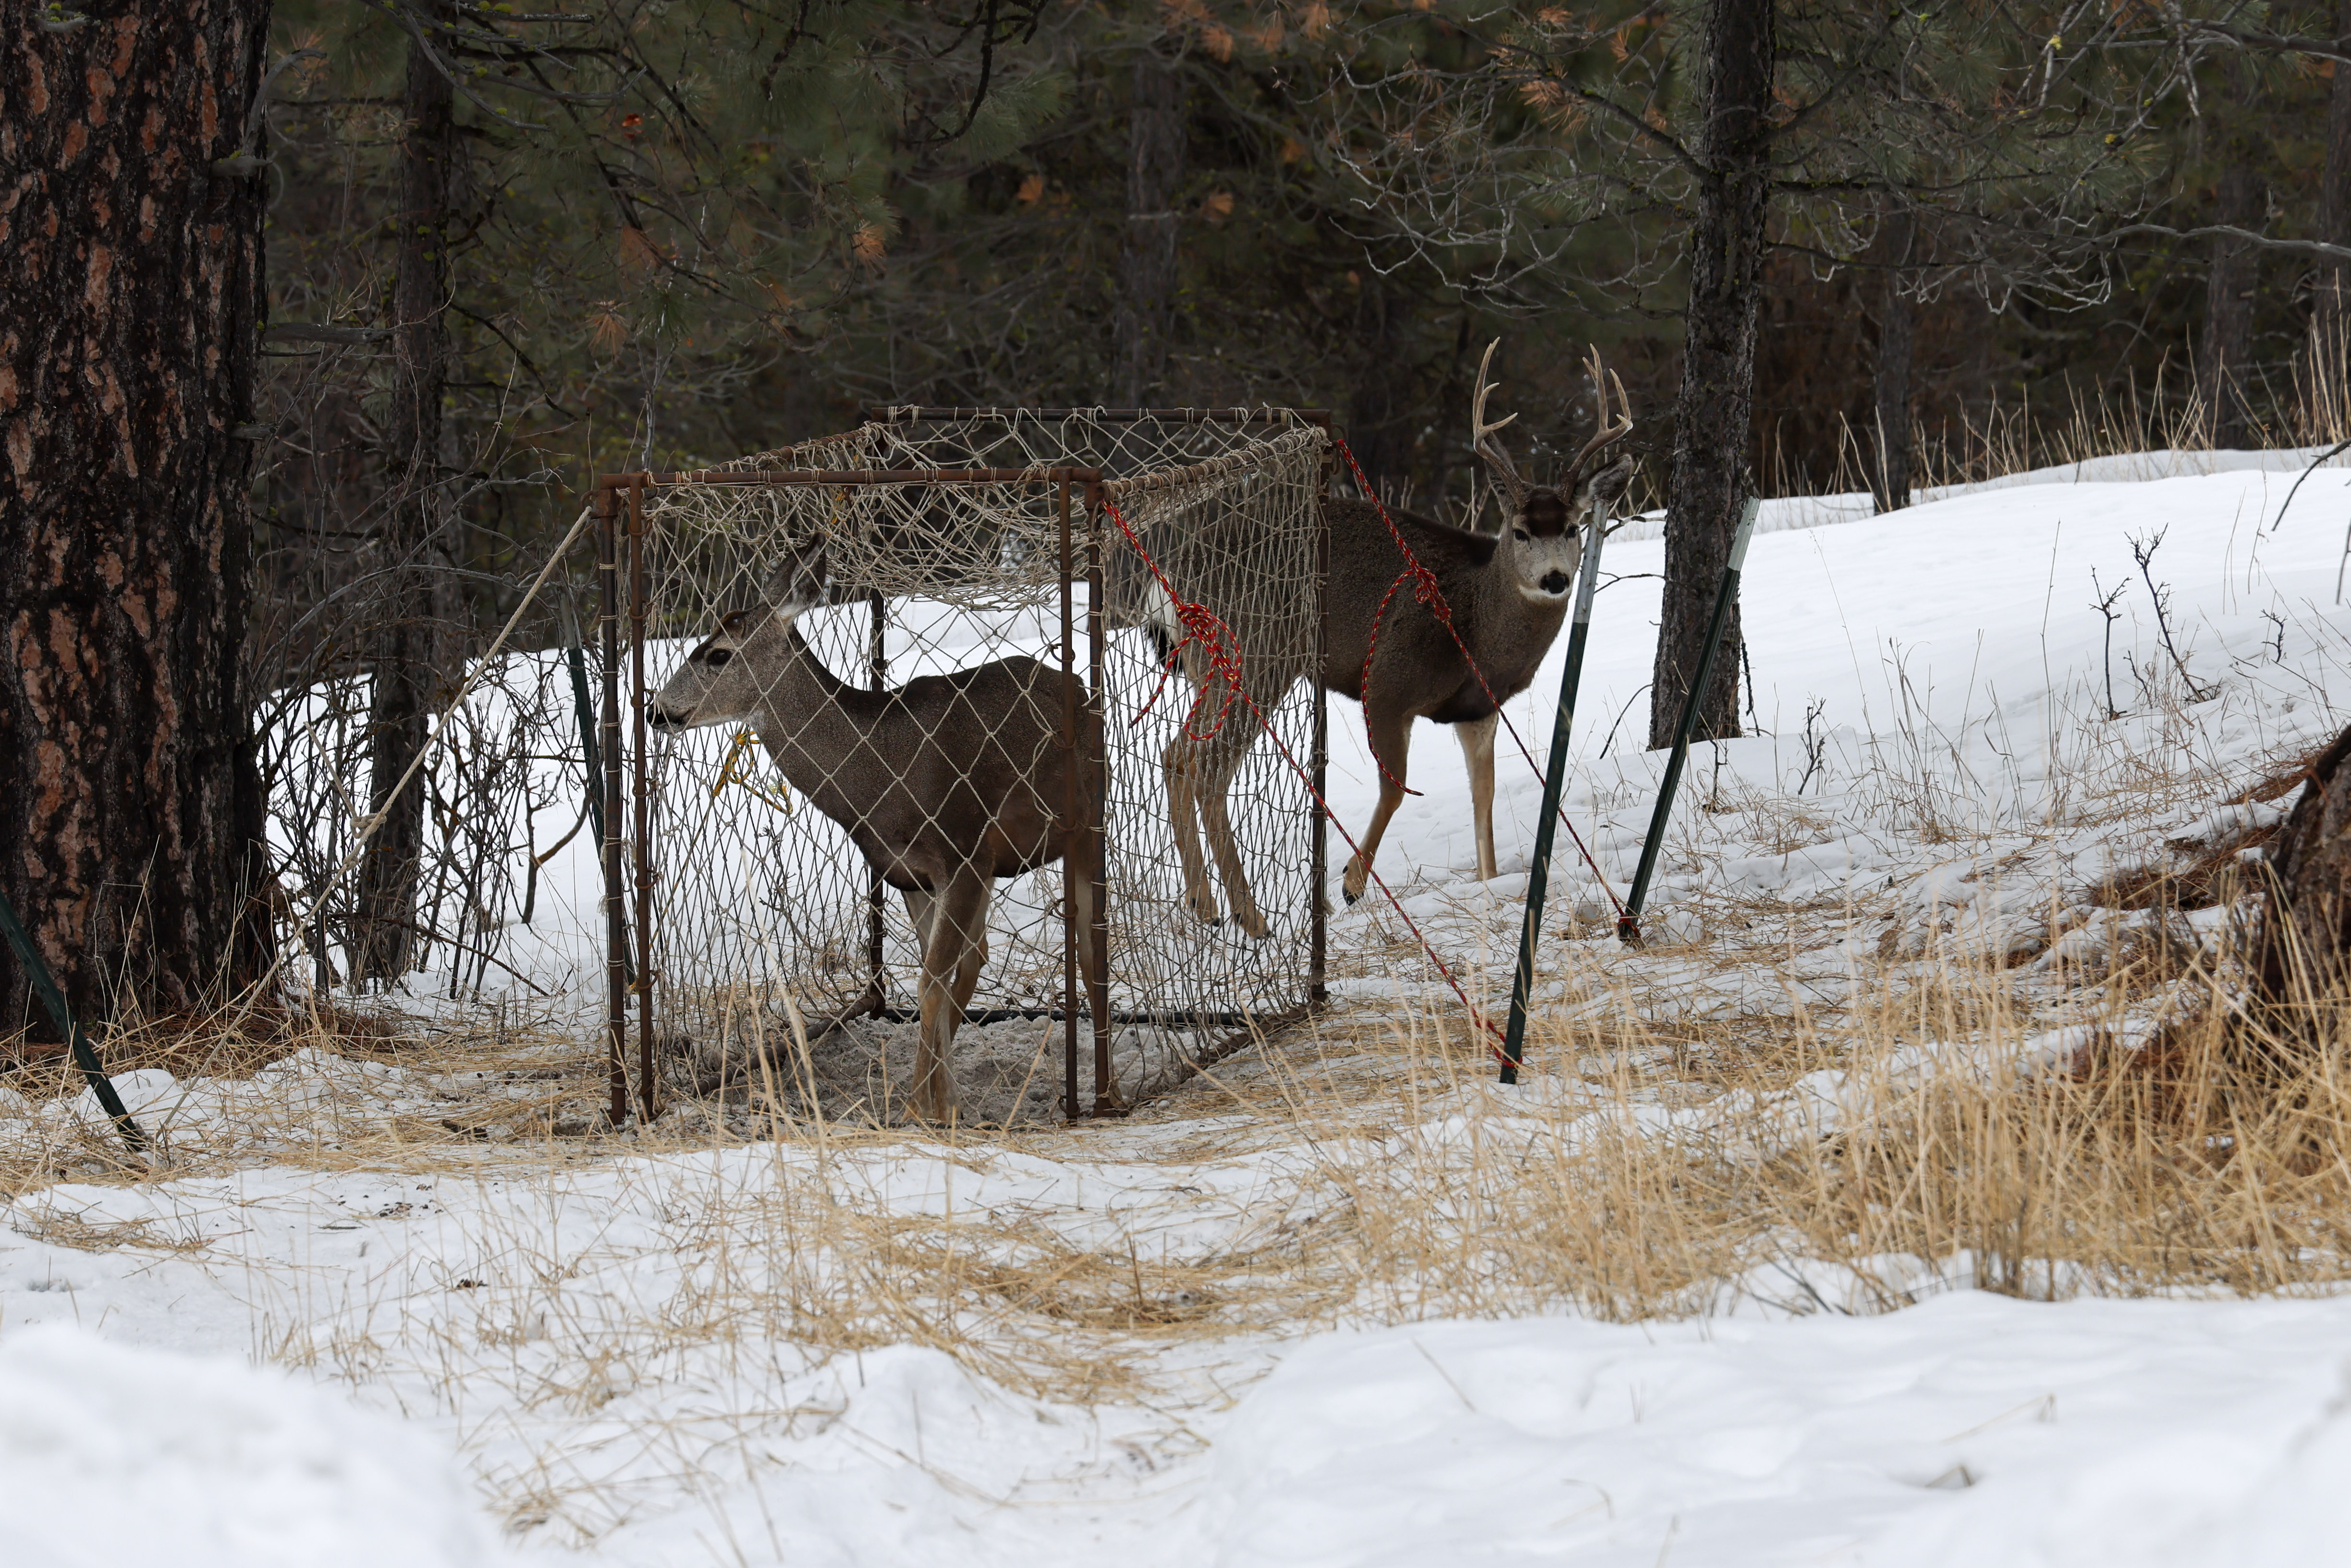 A deer stands in a clover trap while another walks outside the trap nearby.